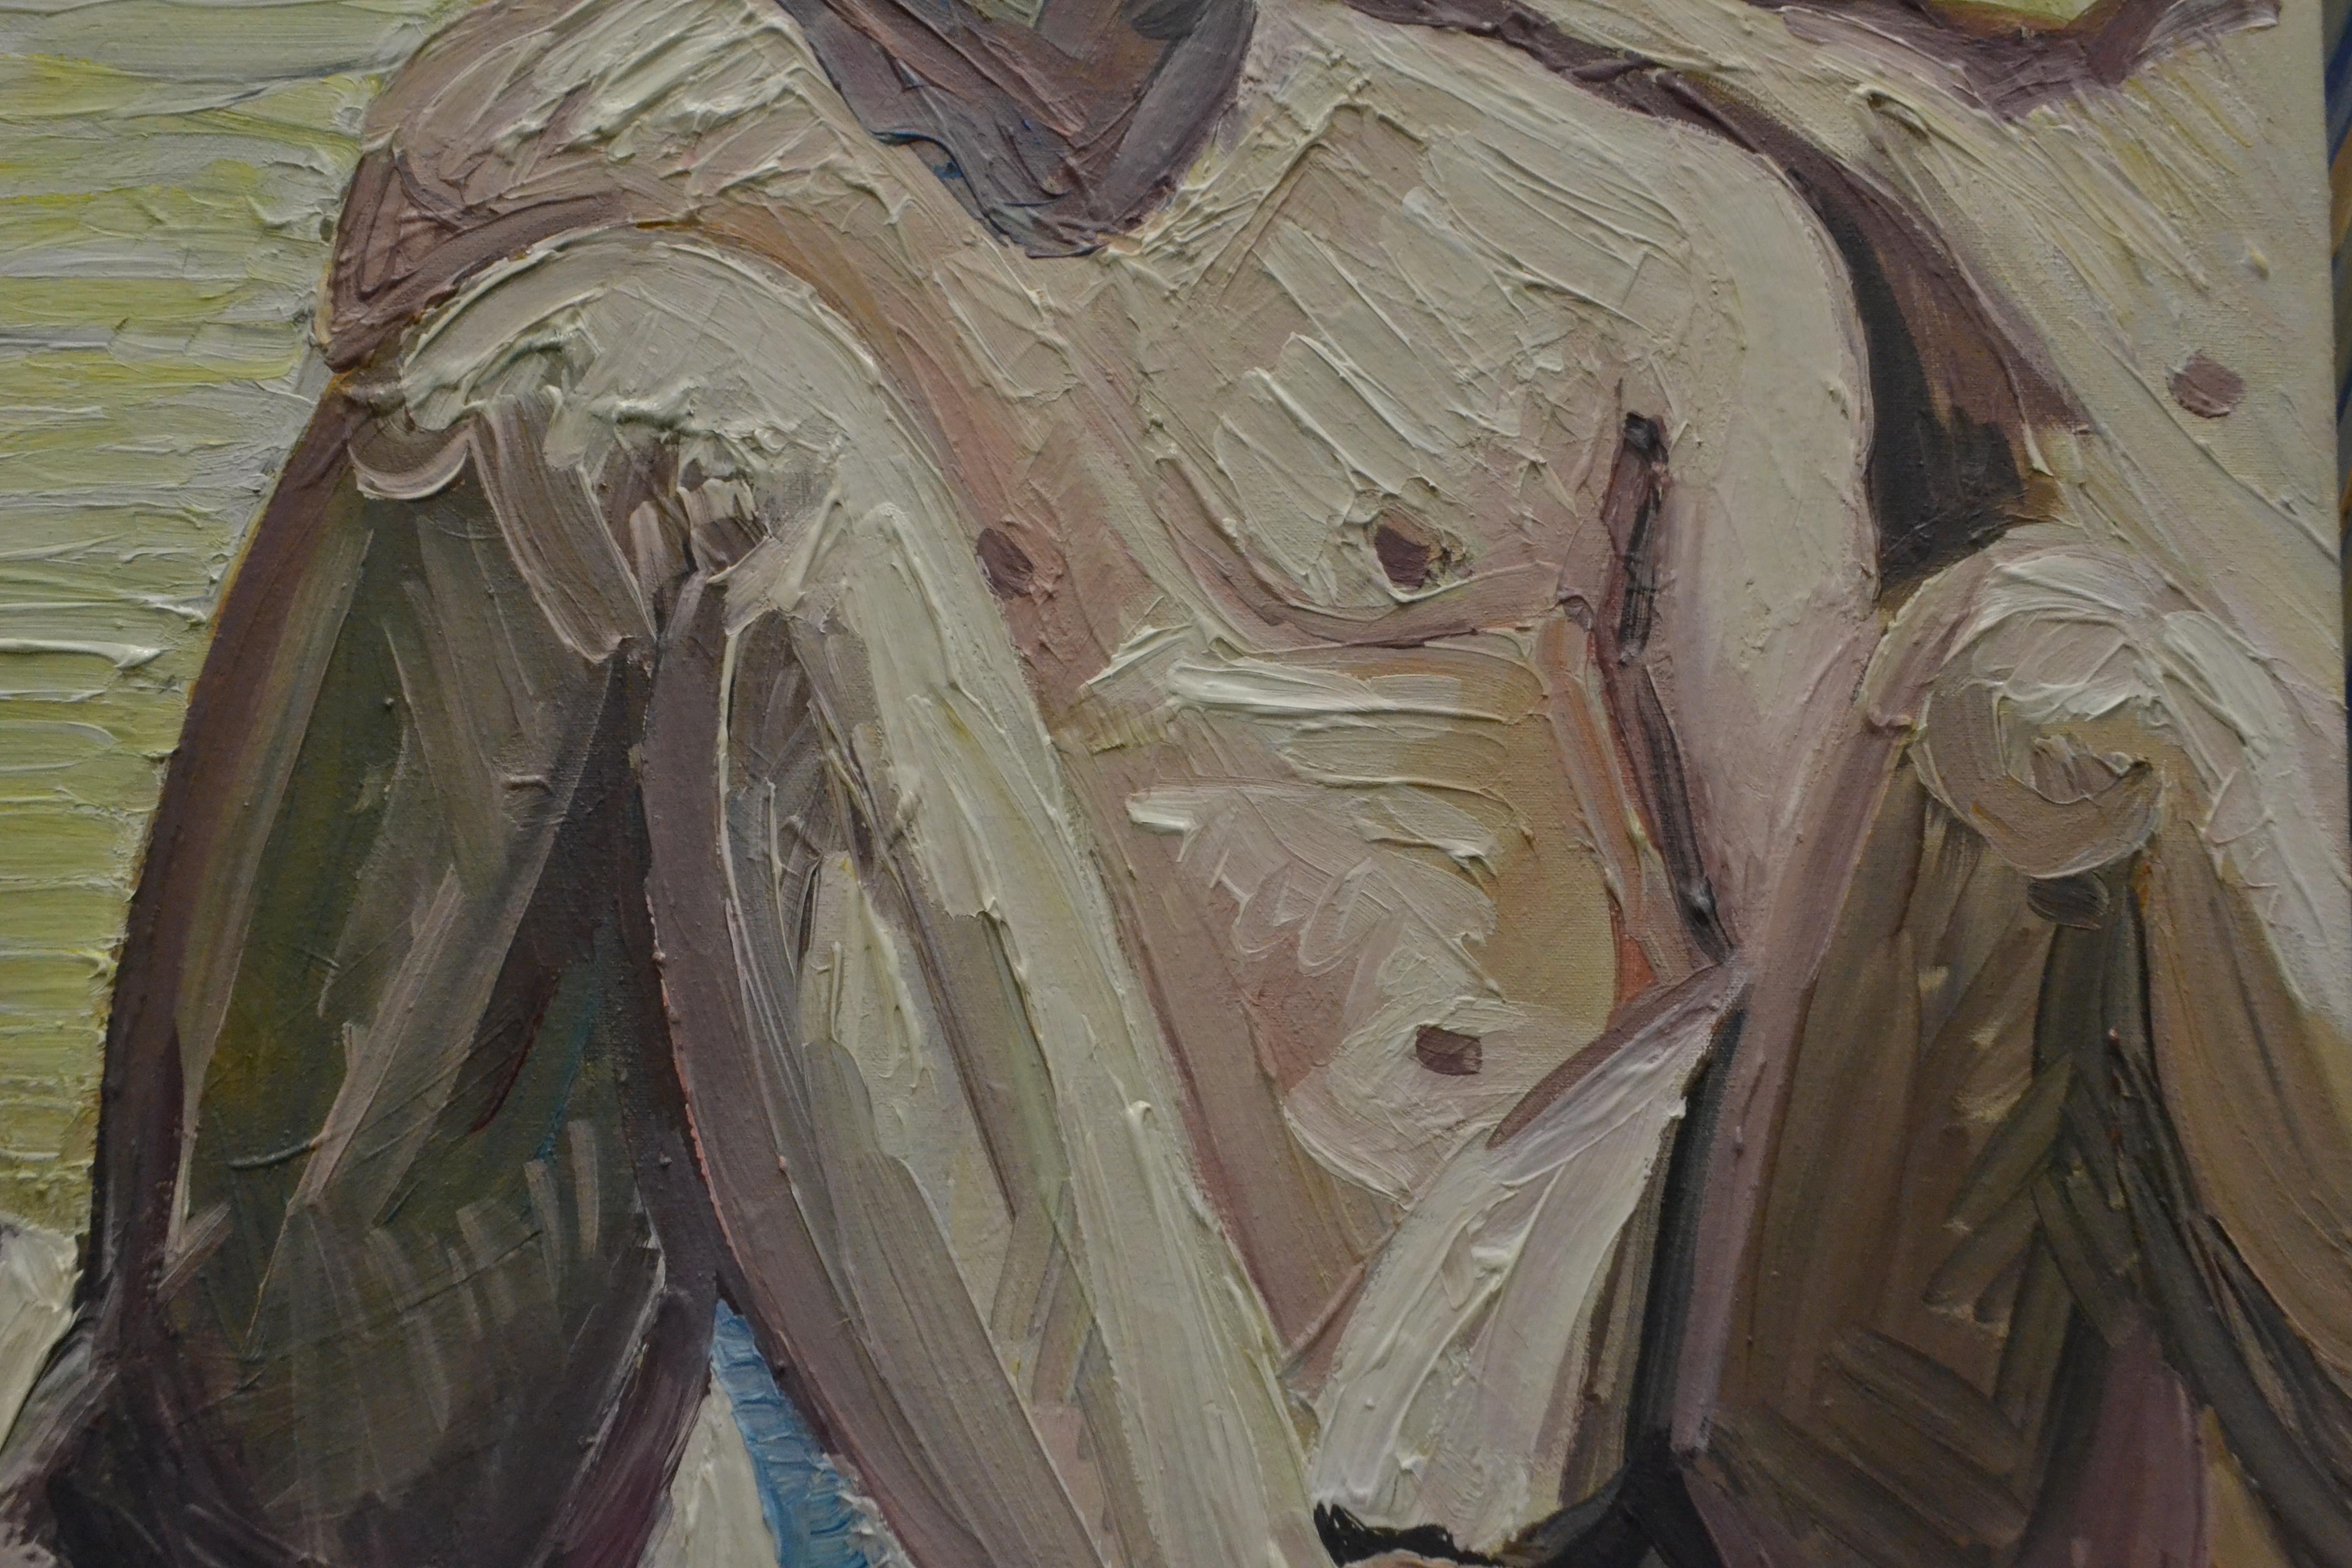 Summer 8 - Contemporary Expressive, Figurative Oil Painting, Male Nude Series - Gray Figurative Painting by Bartosz Kolata